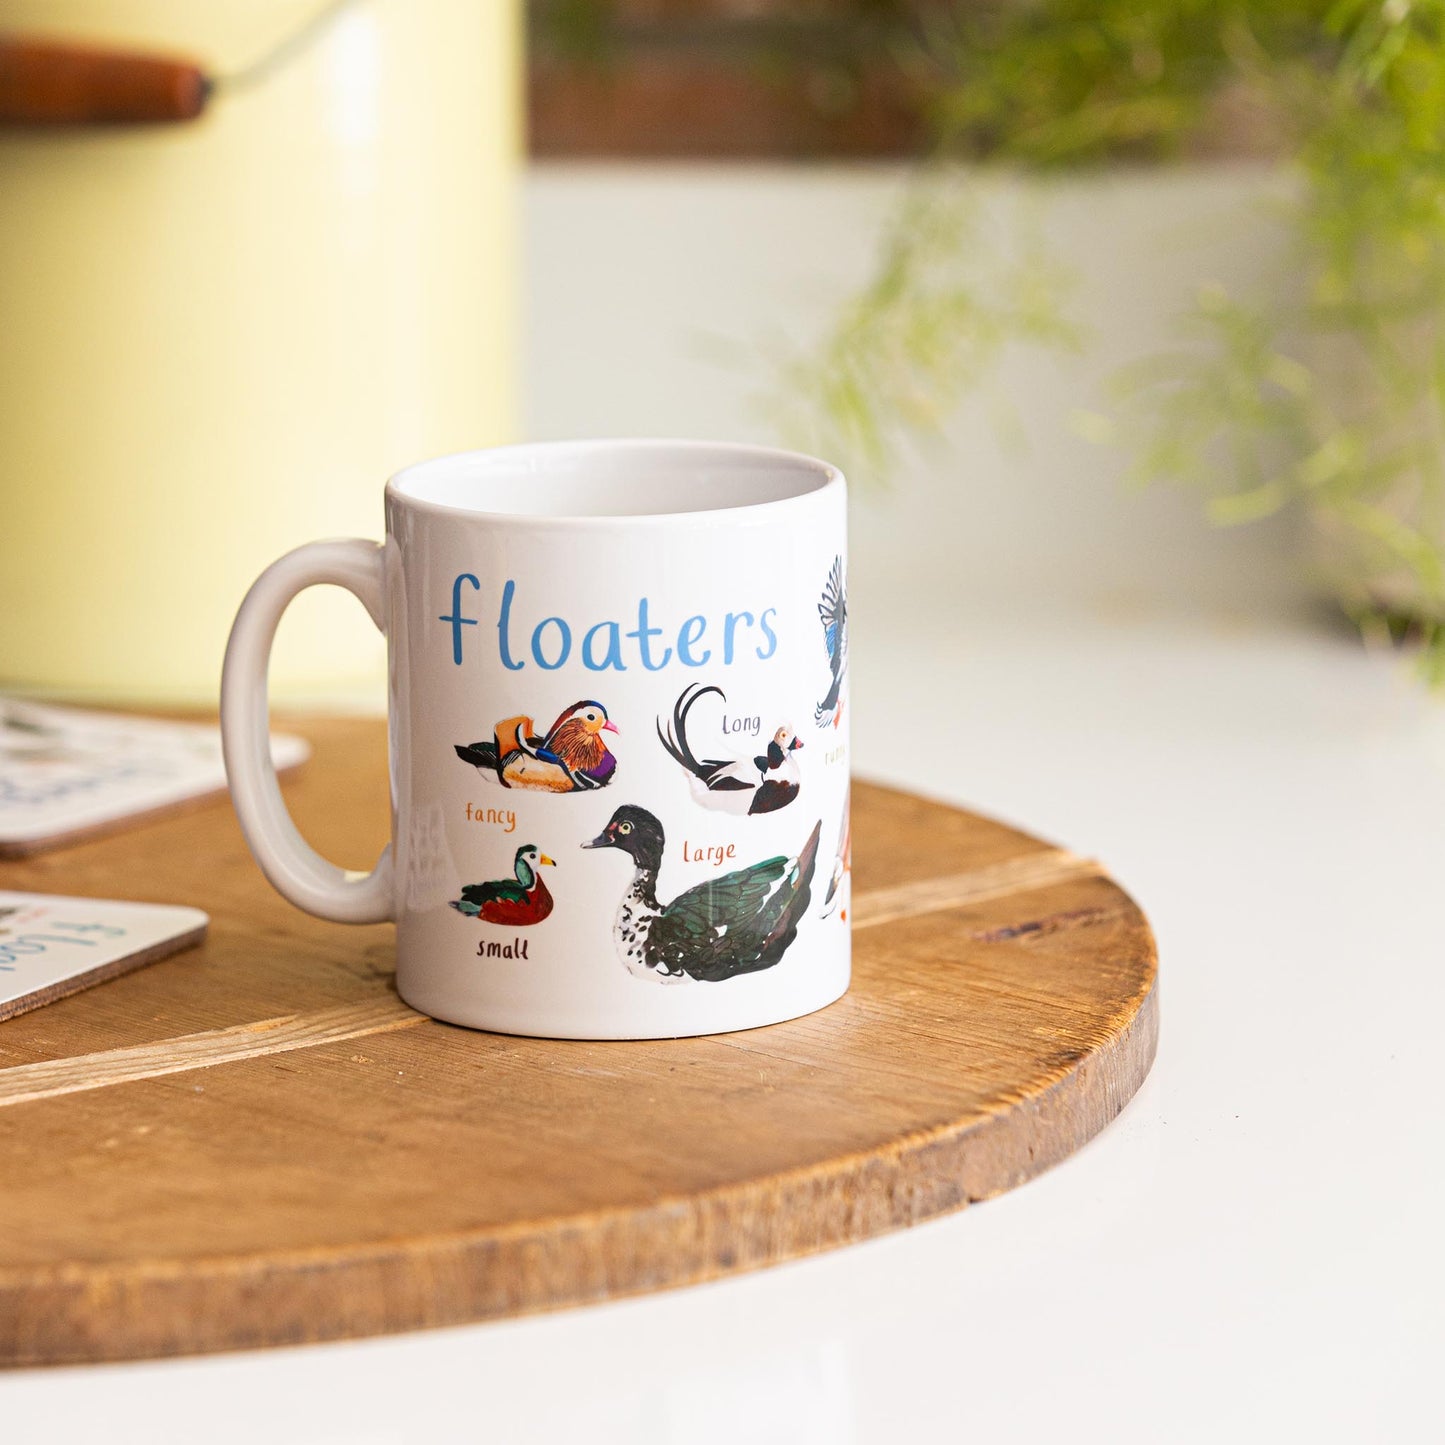 Set of 4 Ceramic Bird Mugs - Shags, Hooters, Floaters and Honkers